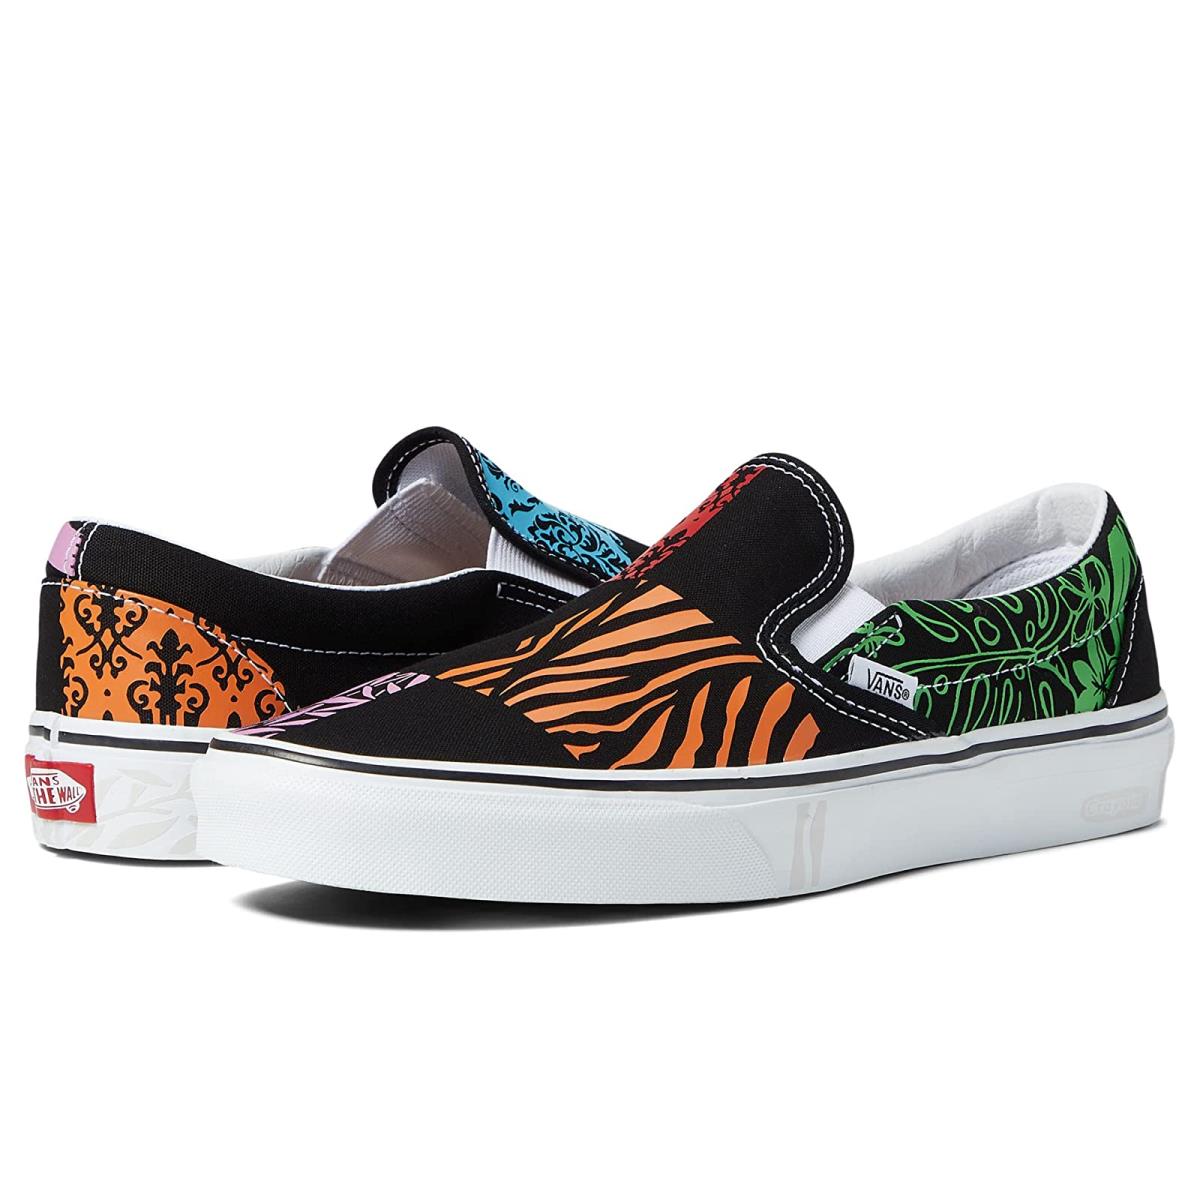 Unisex Sneakers Athletic Shoes Vans Vans X Crayola Sneaker Collection (Crayola) DIY/Trace Your Dreams (Classic Slip-On)